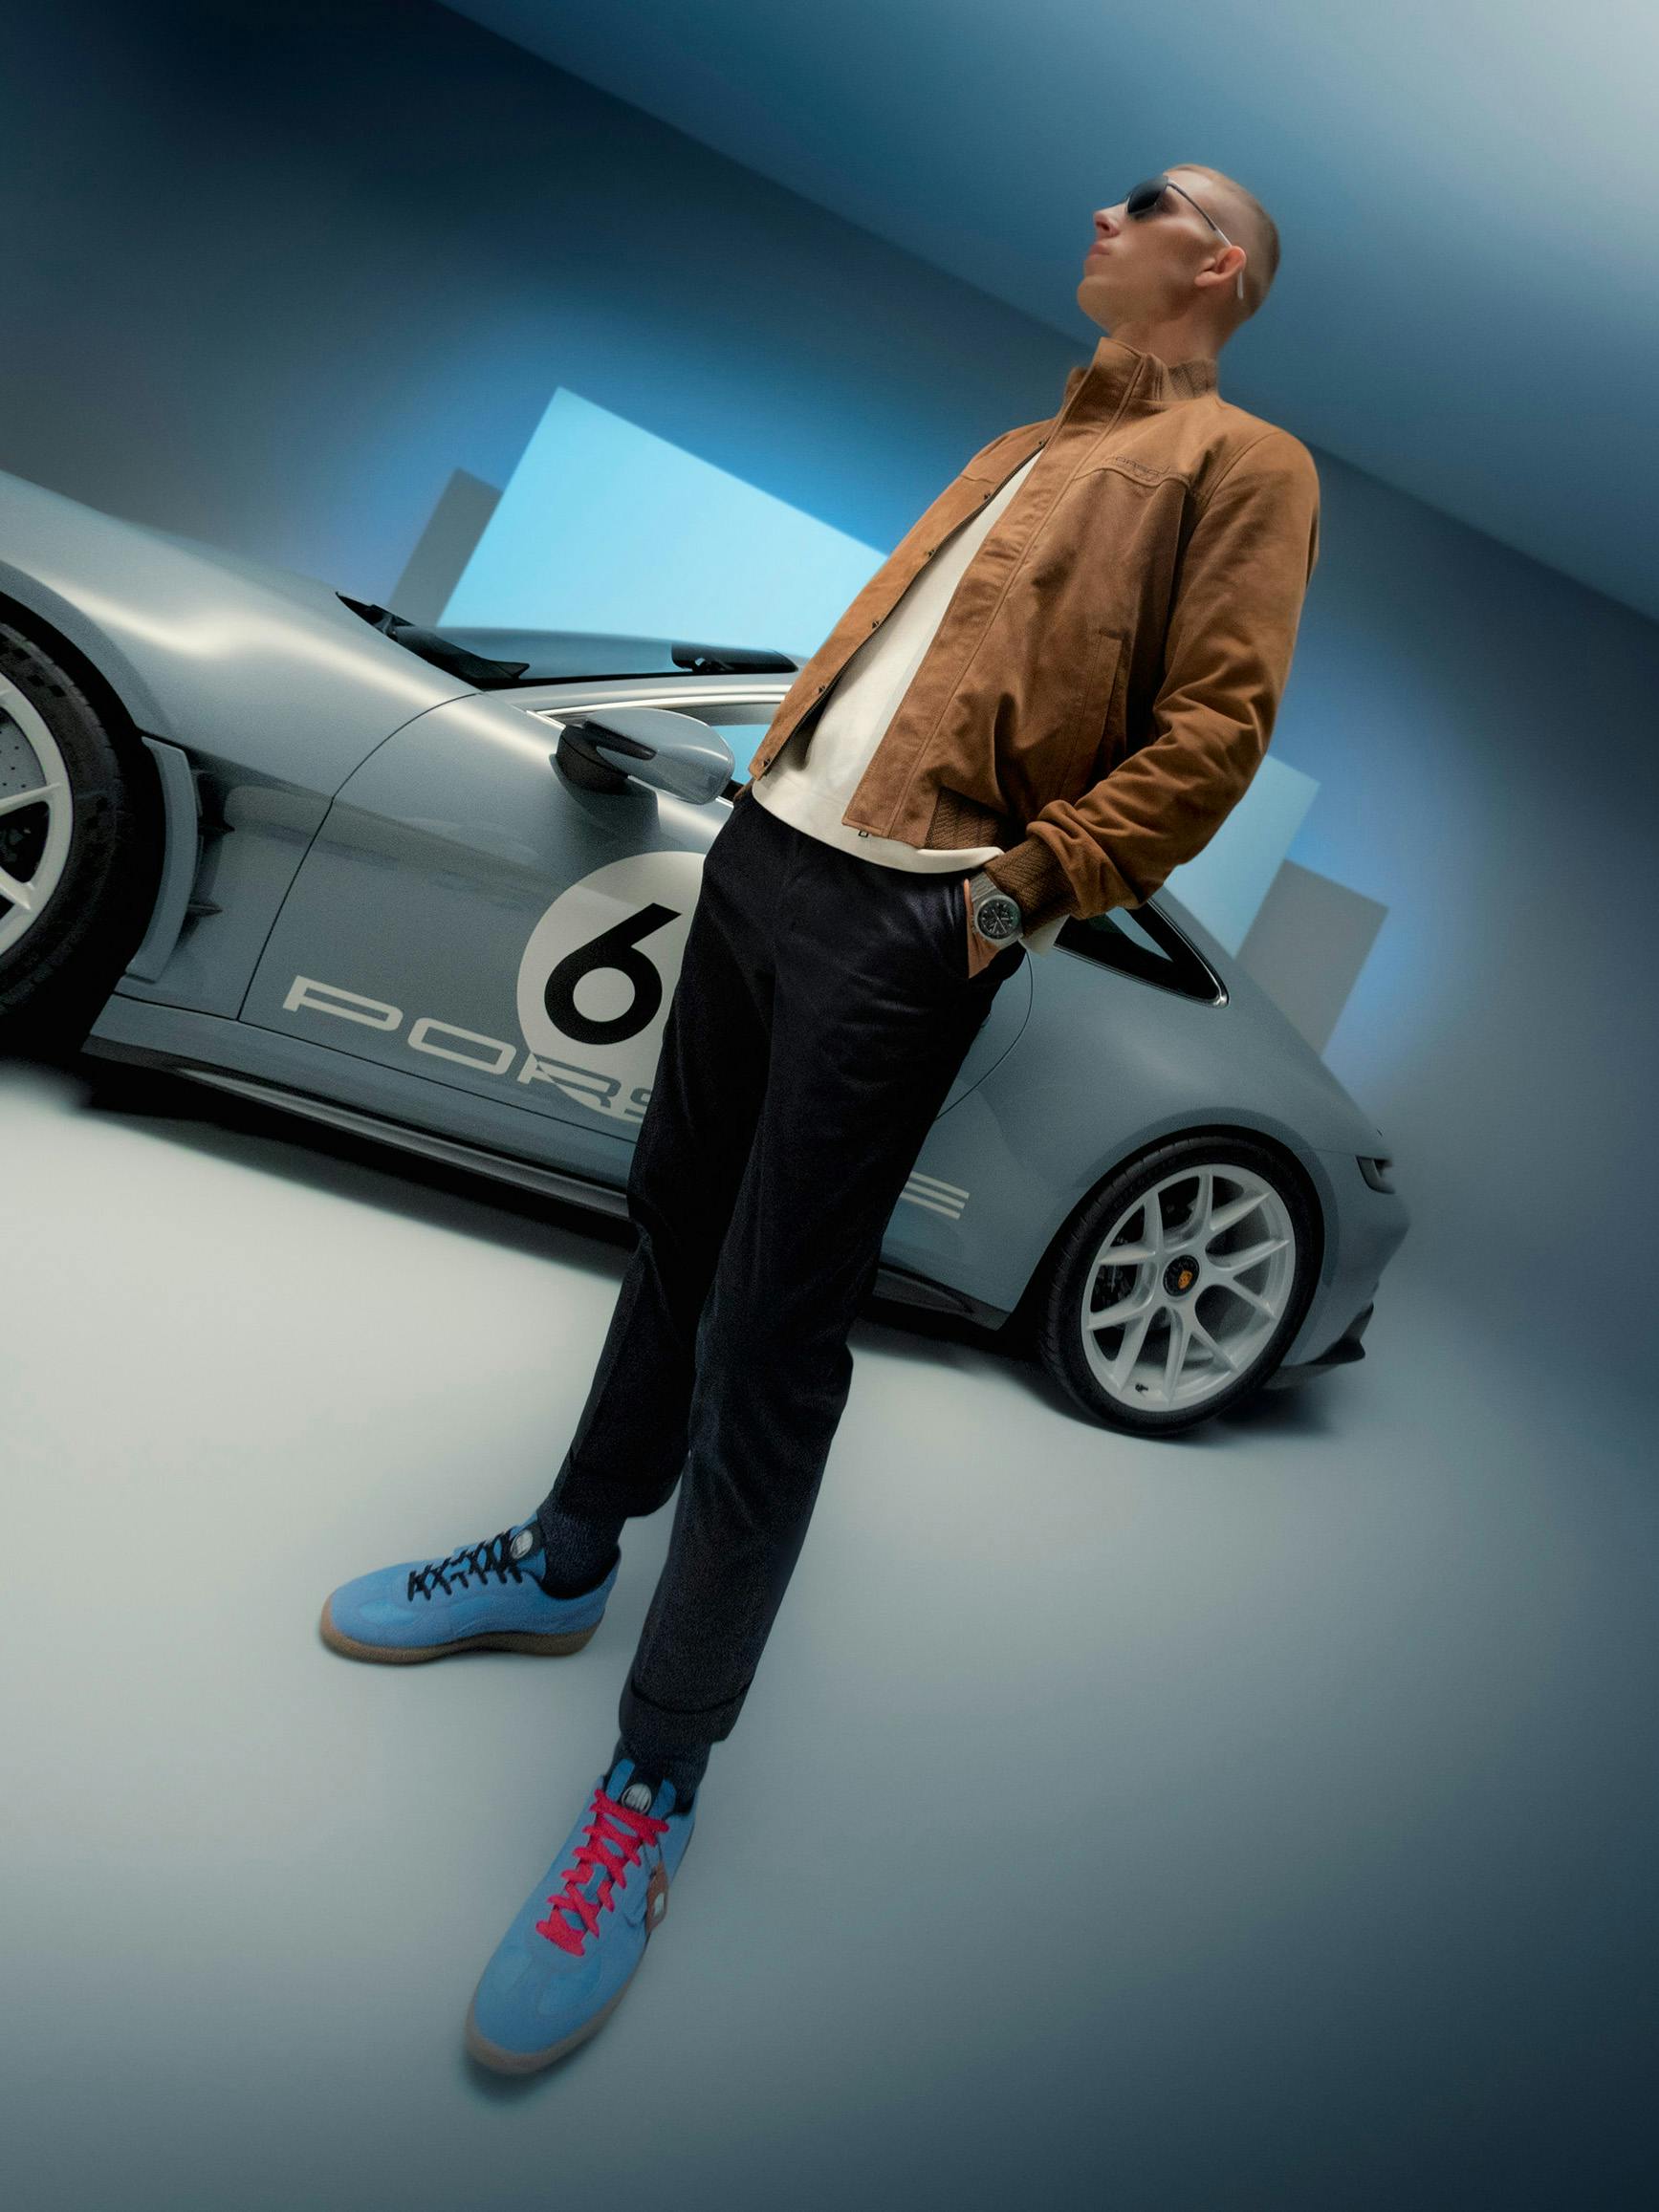 A man wearing a brown jacket, sunglasses and the new Puma sneakers in cooperation with Porsche can be seen from the side. A blue 911 Carrera S/T is cut off in the background.